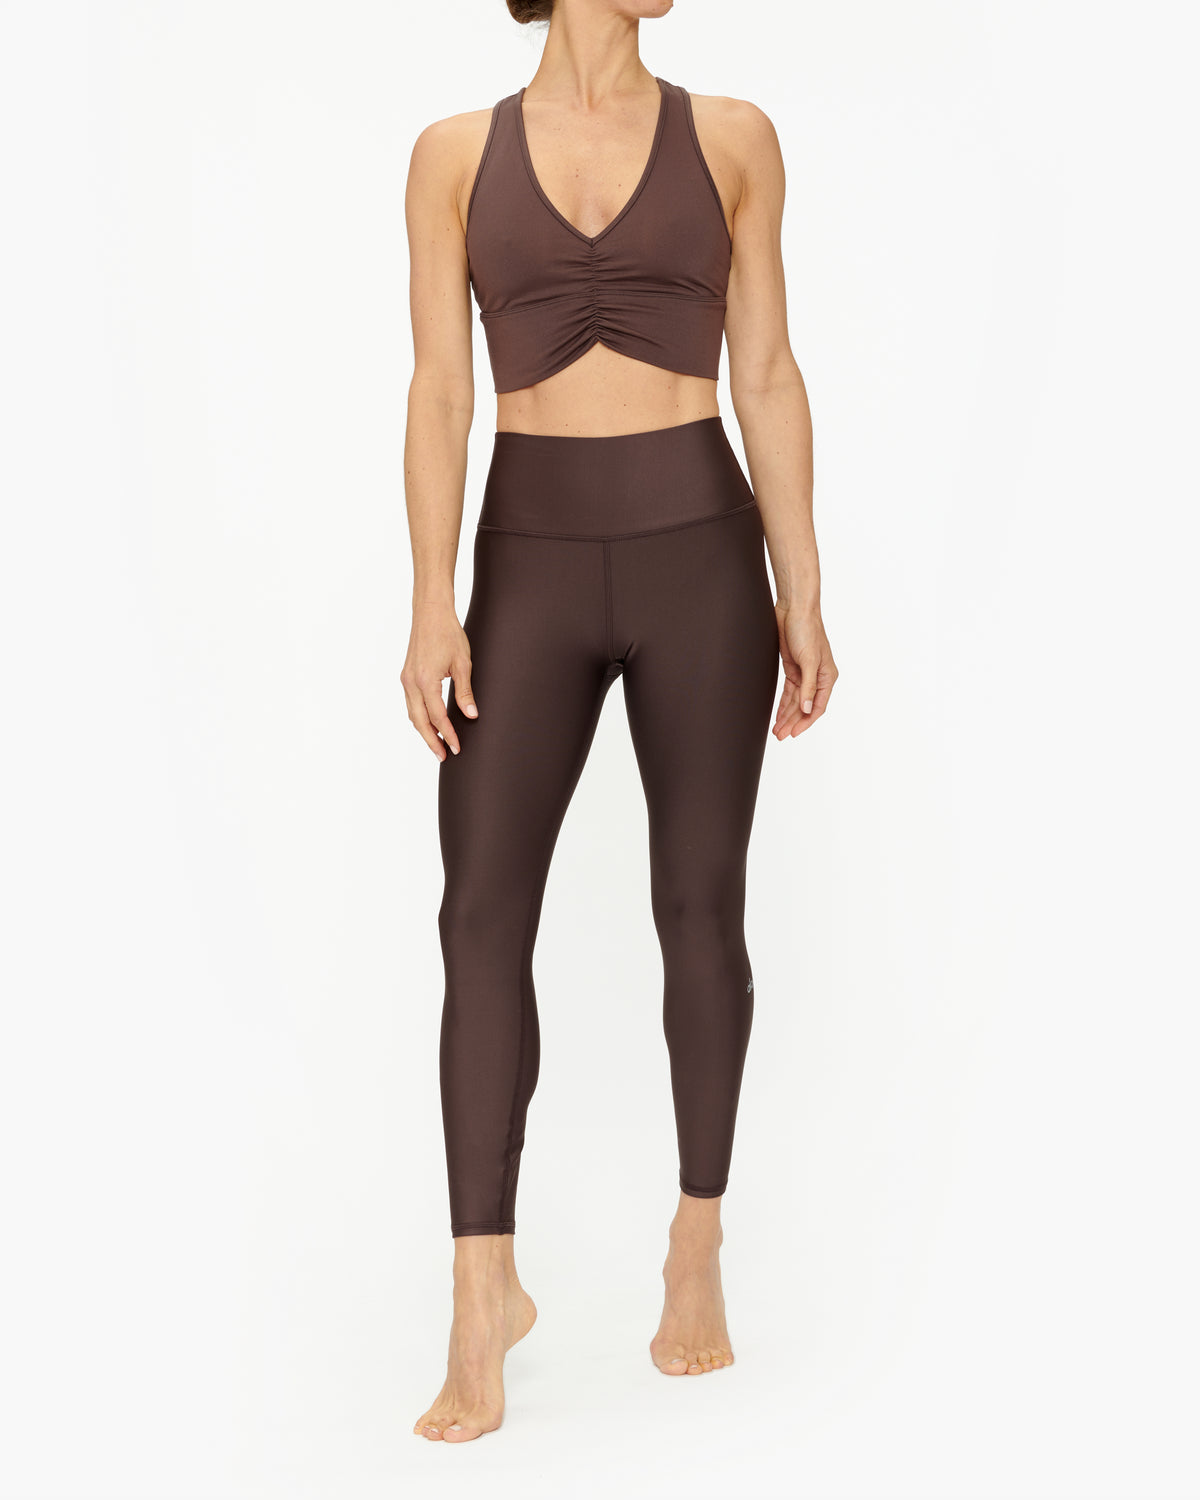 Alo Yoga Airlift Intrigue Bra – The Shop at Equinox